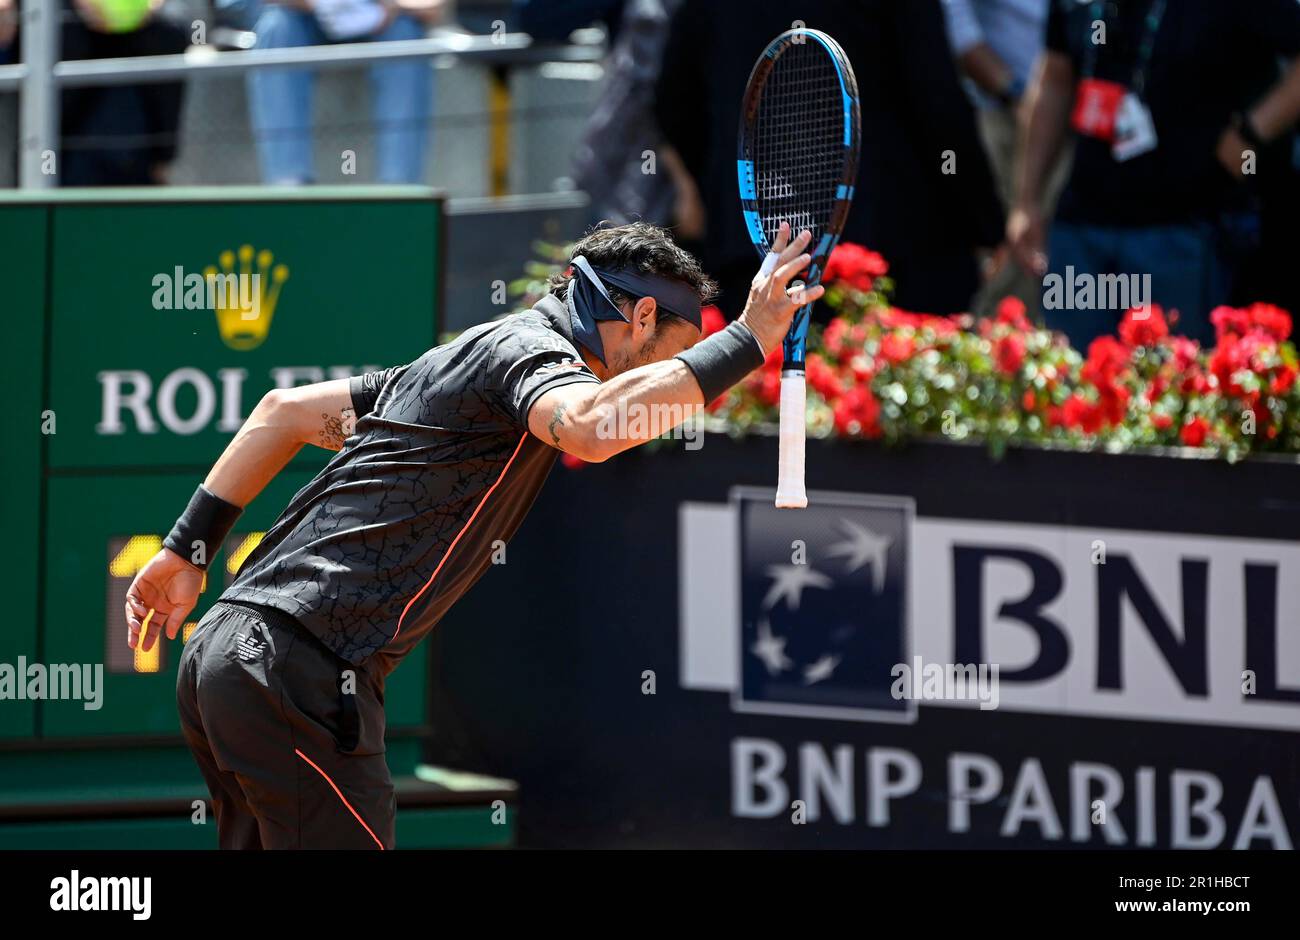 May 14, 2023, Rome: Fabio Fognini of Italy reacts during his men's singles  second round match against Holger Rune of Denmark (not pictured) at the  Italian Open tennis tournament in Rome, Italy,